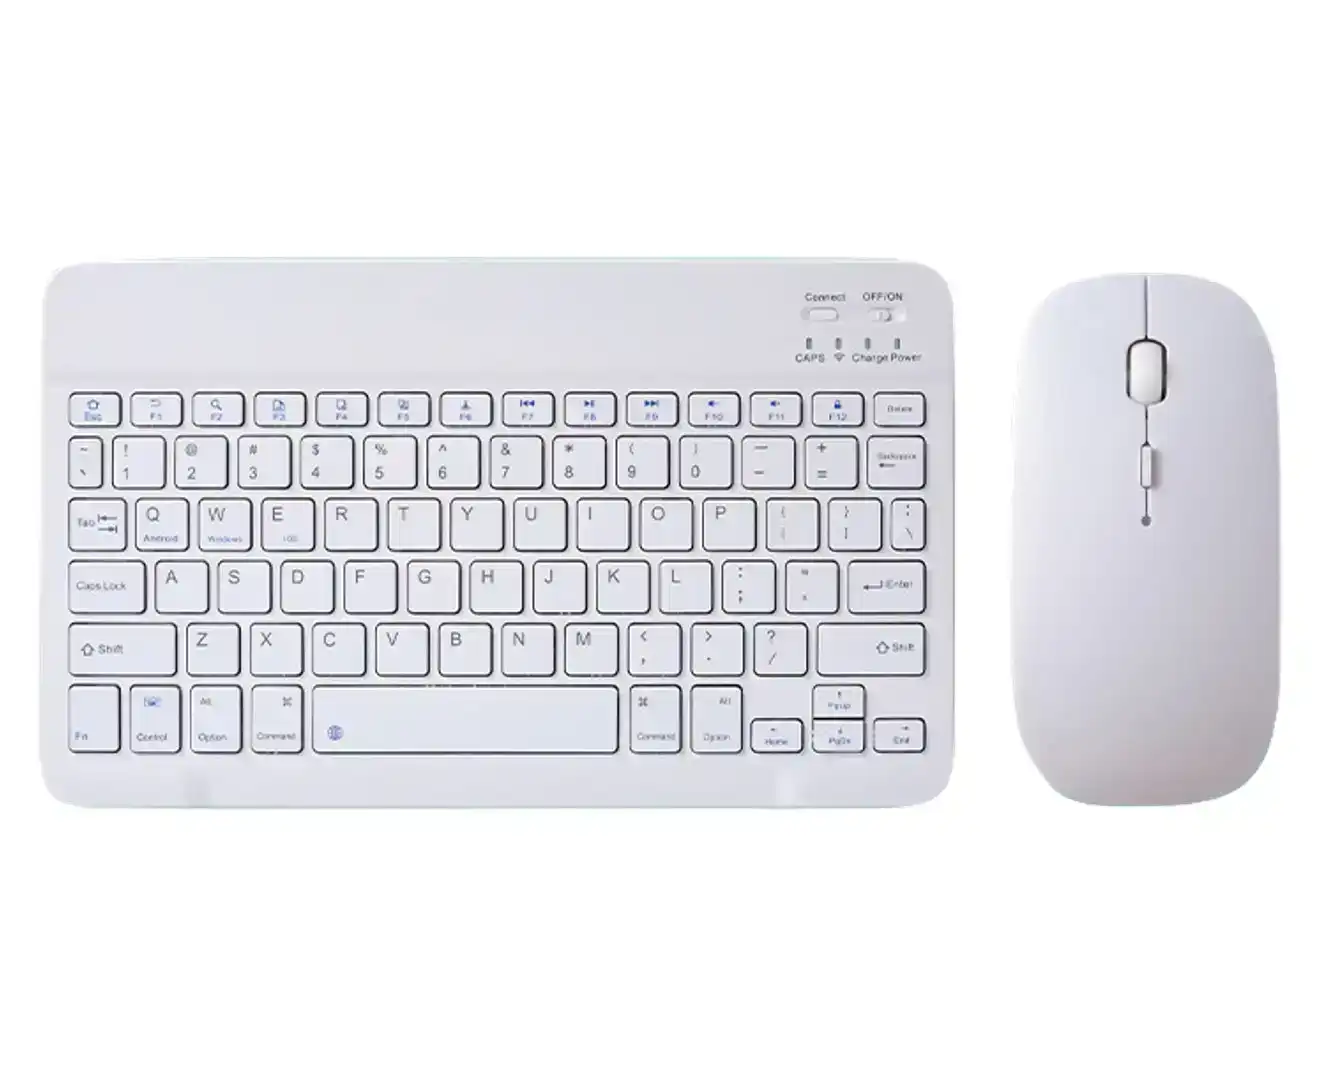 Portable Bluetooth Slim Wireless Keyboard + Mouse 2-in-1 Combo for Tablets, Smartphones, PCs, Smart TVs, White